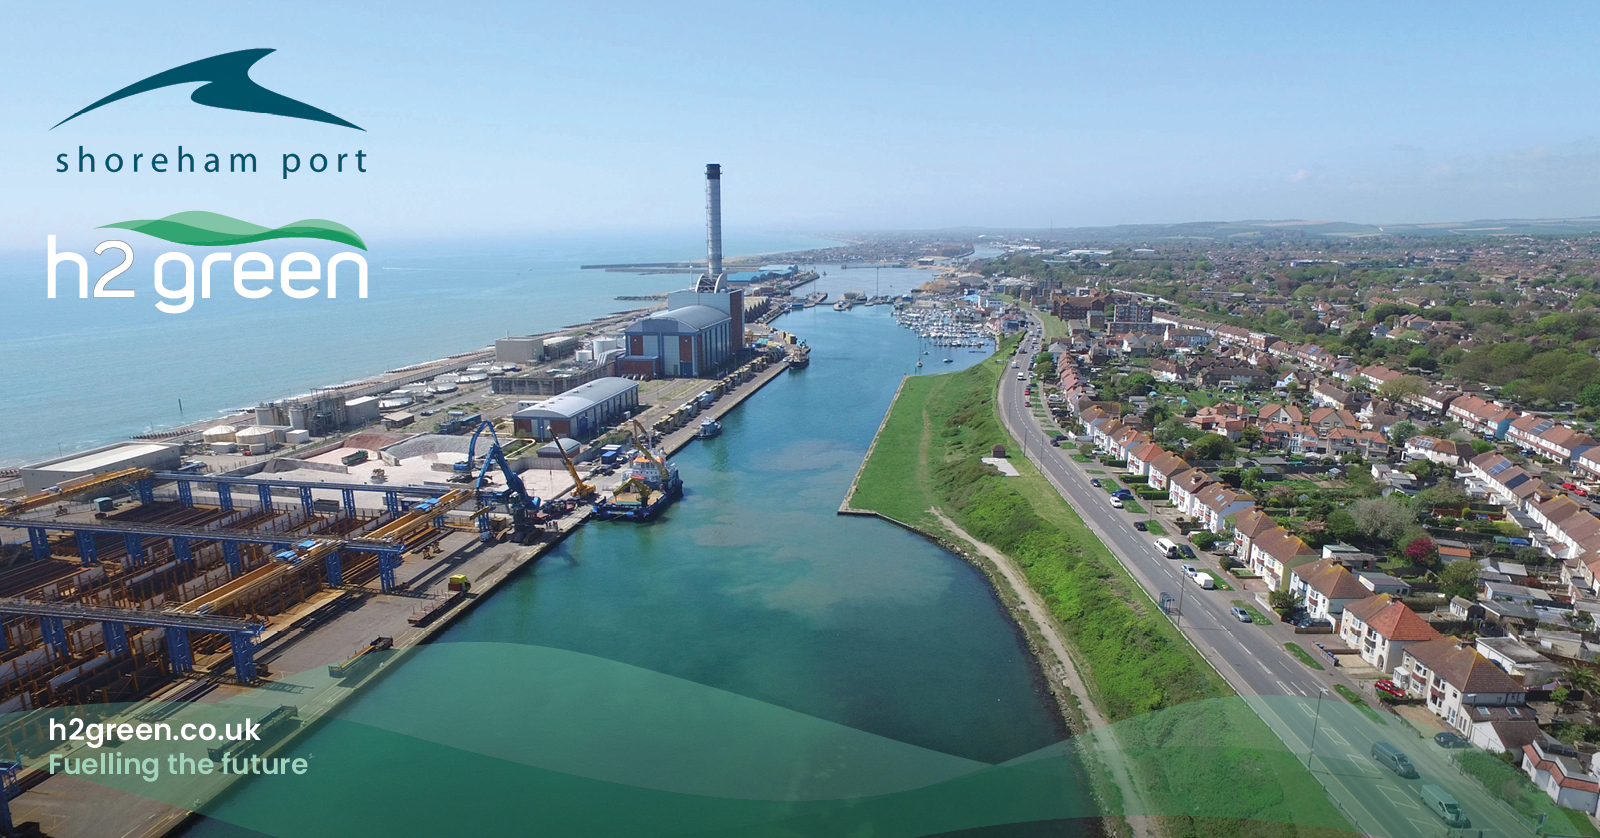 Agreement to Develop Clean Energy Hub for Shoreham Port Sussex H2 Green